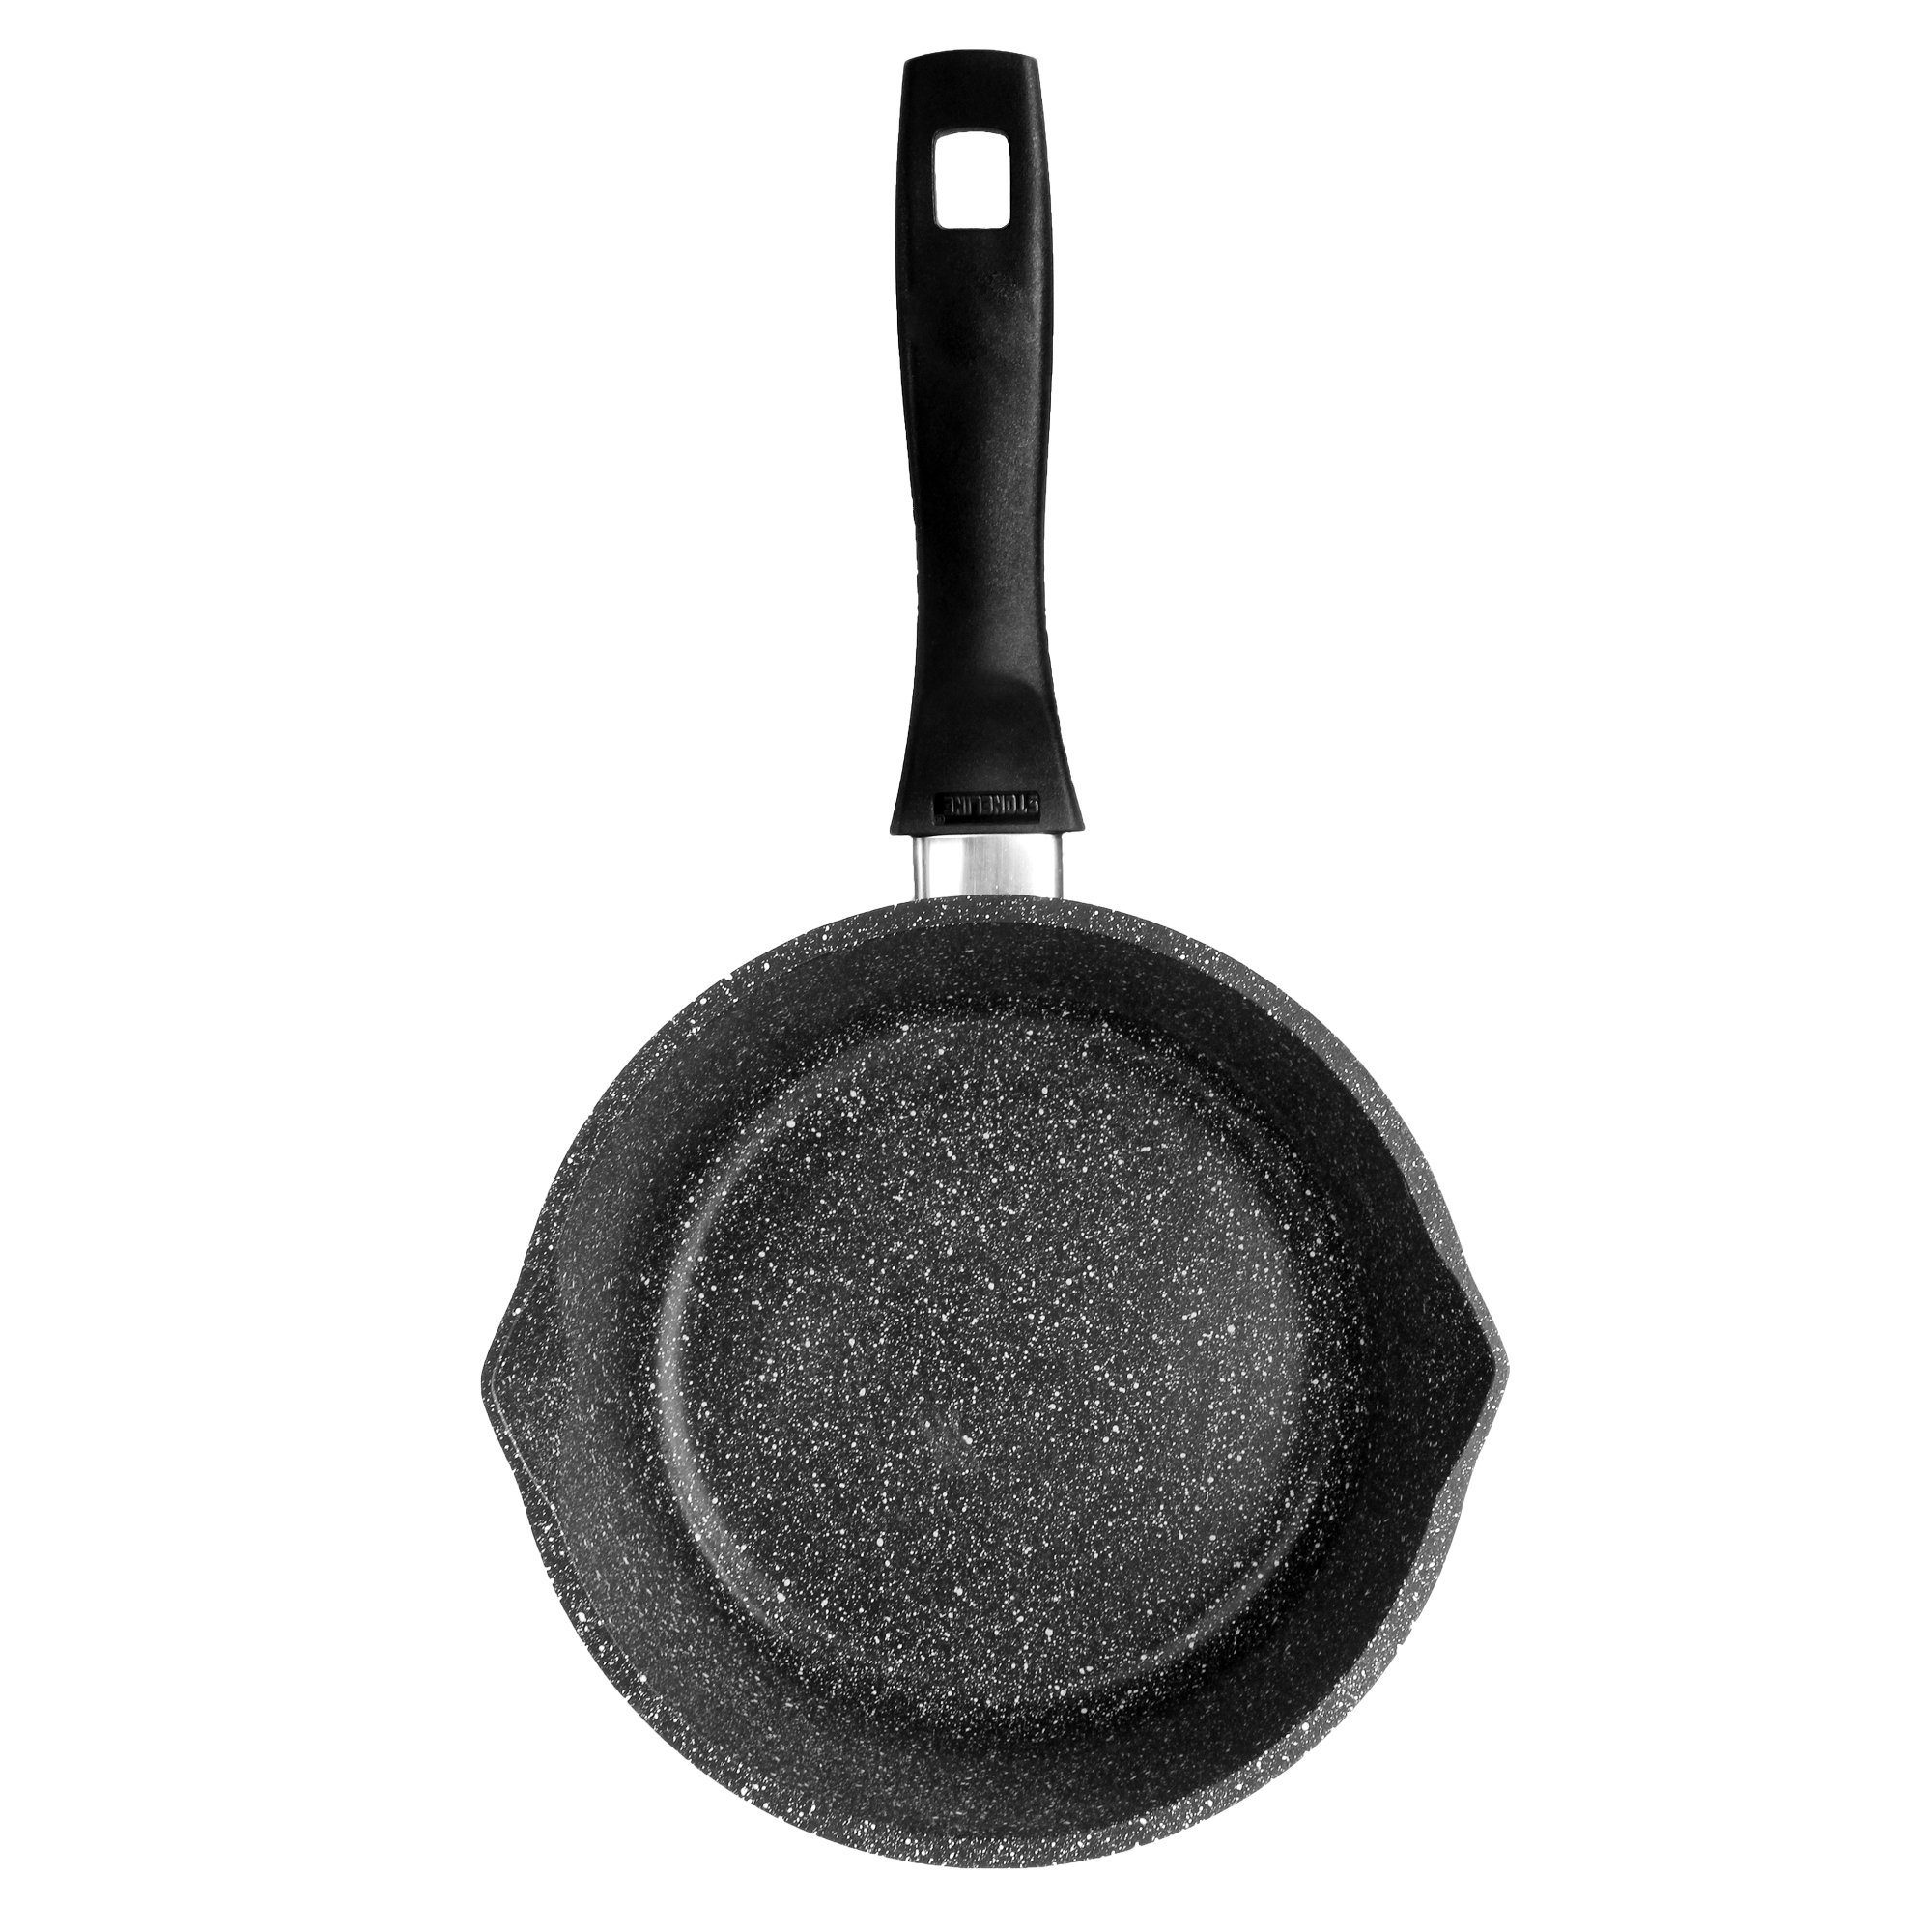 STONELINE® Saucepan 18 cm, with glass lid, non-stick coating, suitable for induction